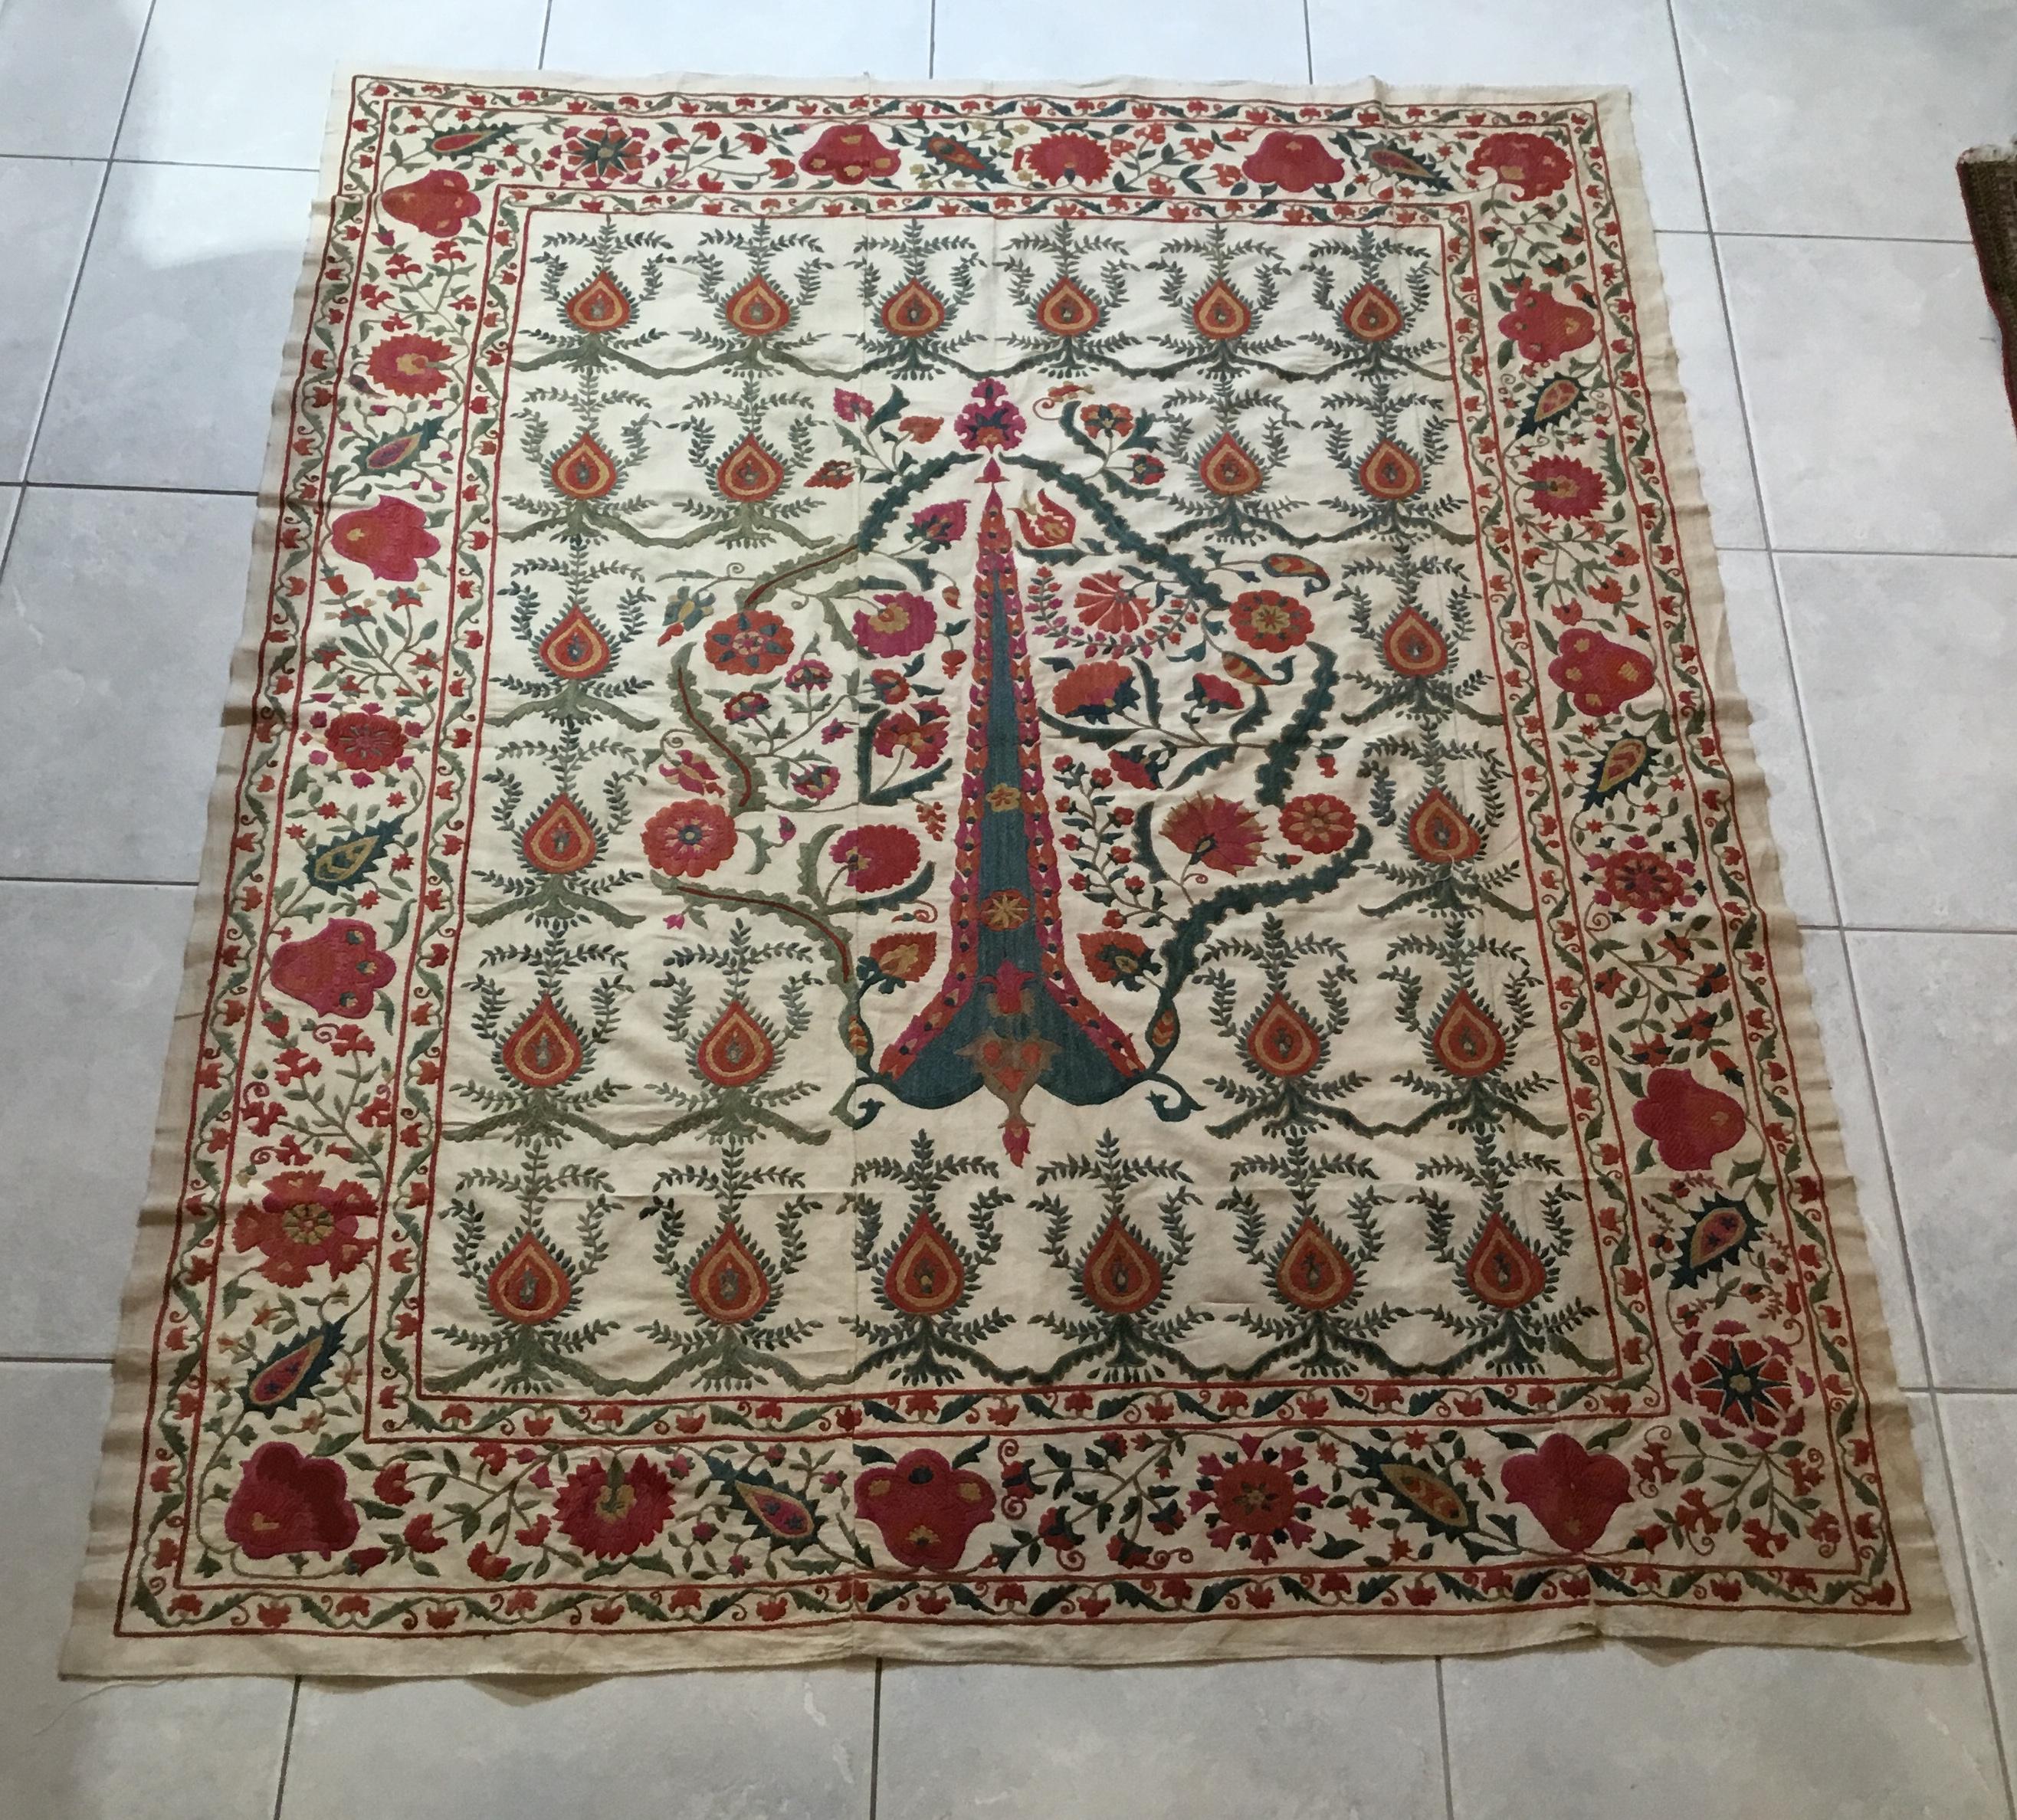 Beautiful artisan Suzani textile made of hand embroidery silk, of floral and vine motifs, all around one way center piece on cream color handcrafted background. Could use as a tapestry, wall hanging or on sofa chair or bed.